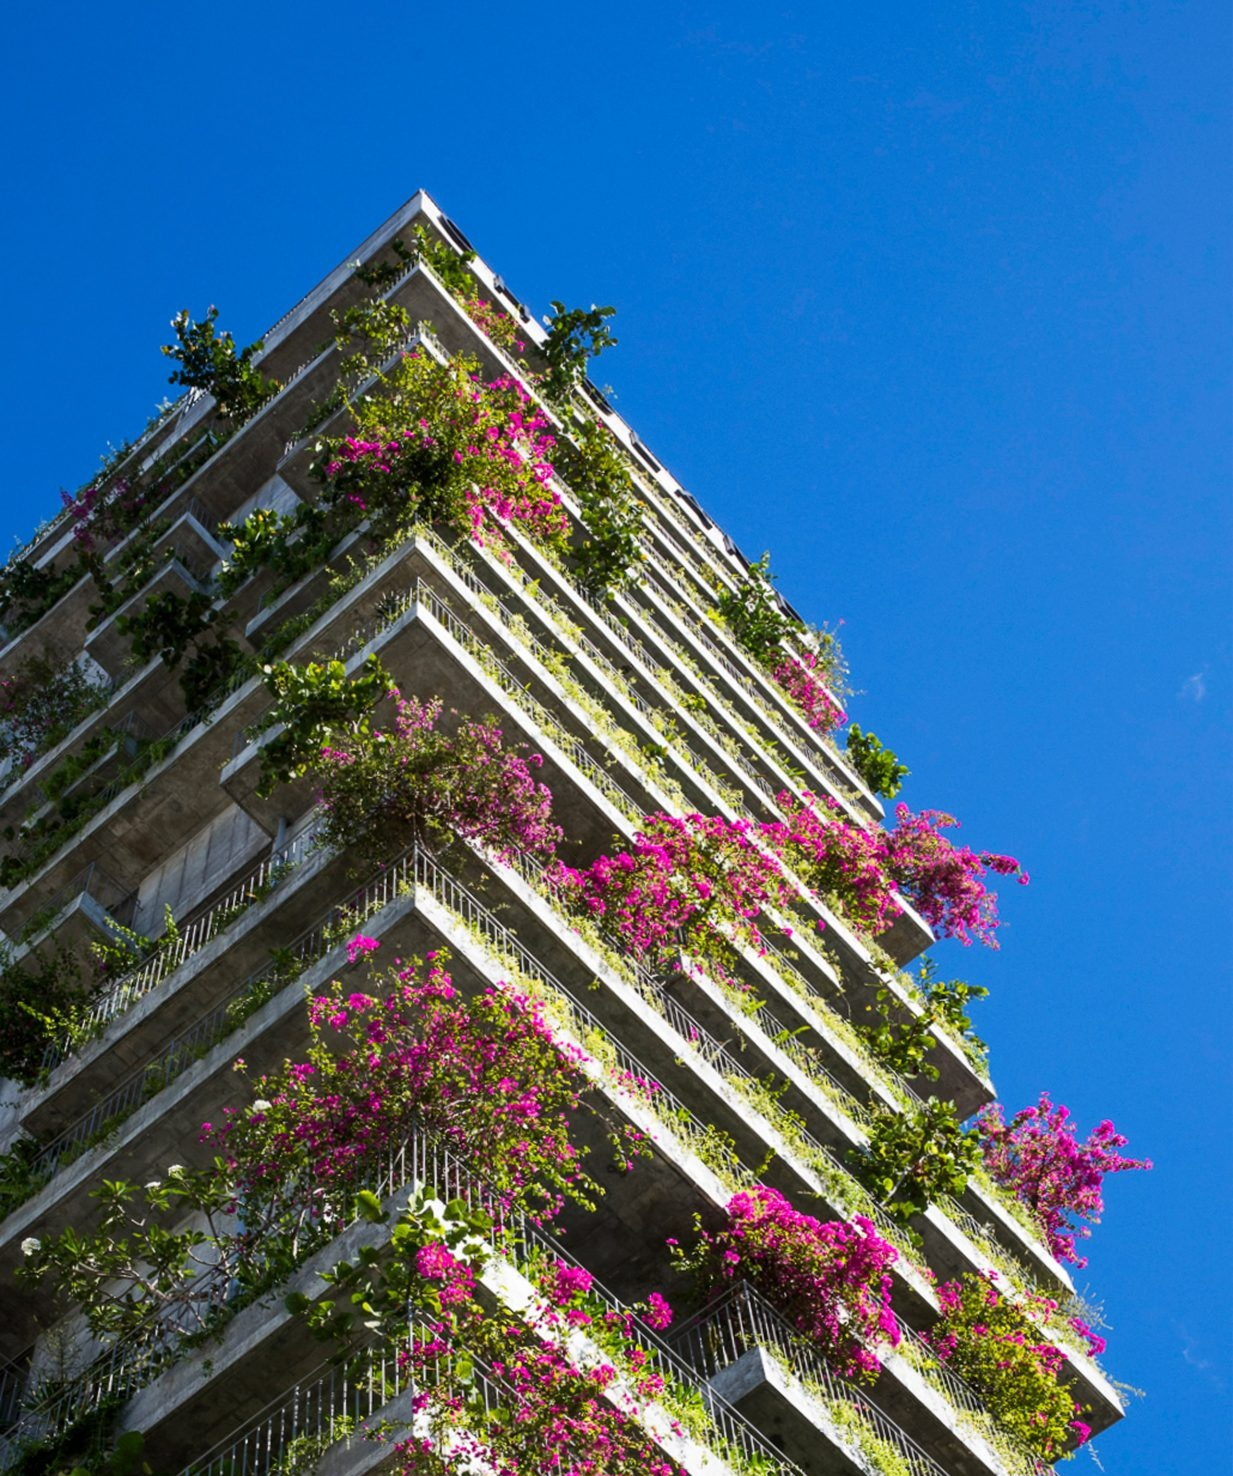 Tropical plants cover the balconies of Chicland hotel in Vietnam